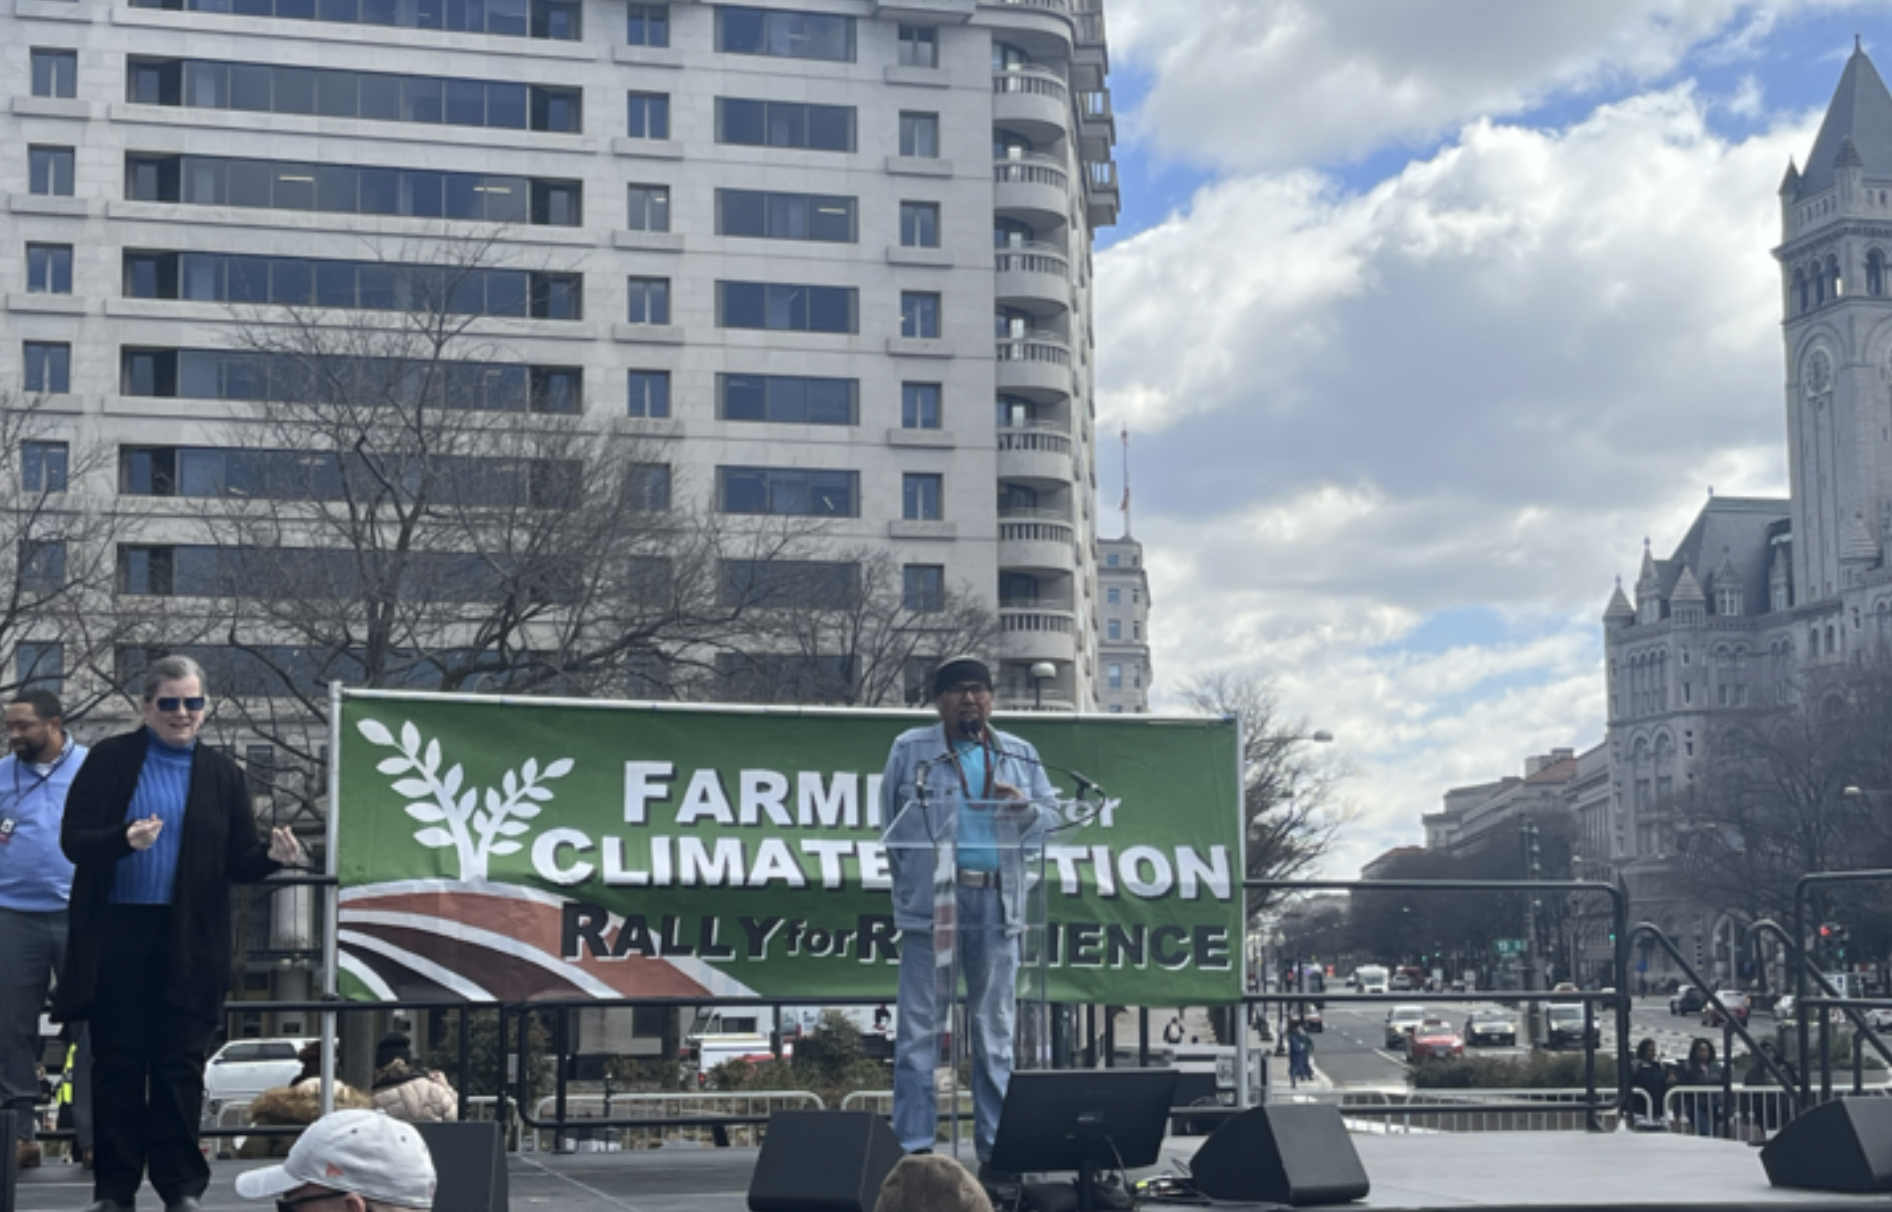 PROGRESSIVE AGRICULTURE GROUPS RALLY FOR LAND ACCESS, CLIMATE-SMART POLICIES IN FARM BILL